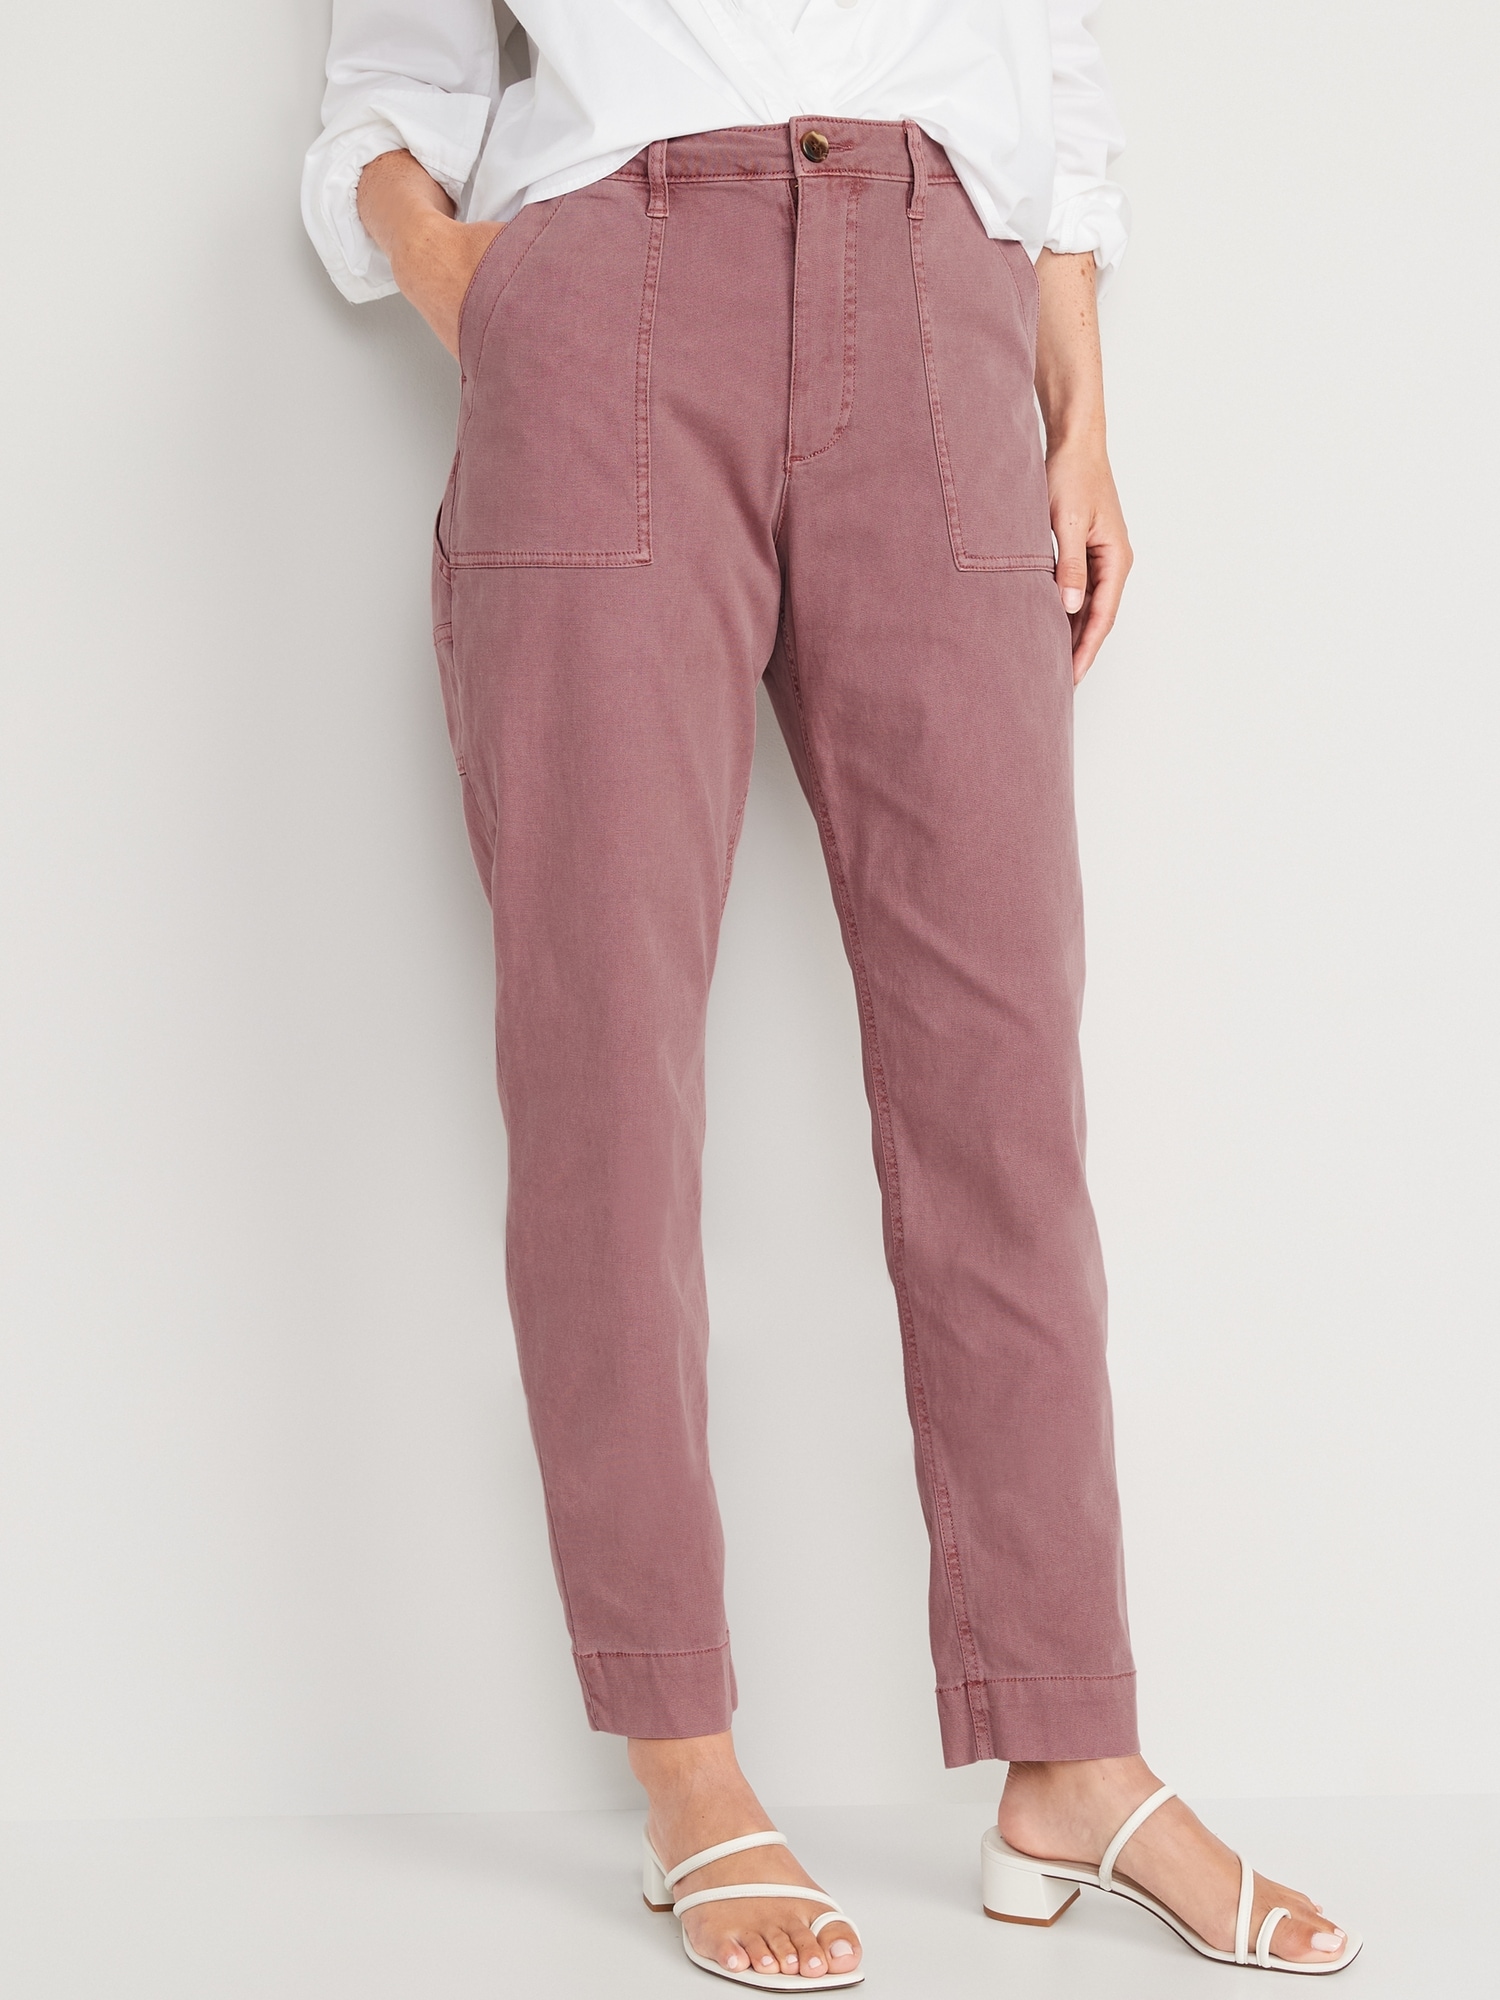 High-Waisted Straight Canvas Workwear Pants for Women